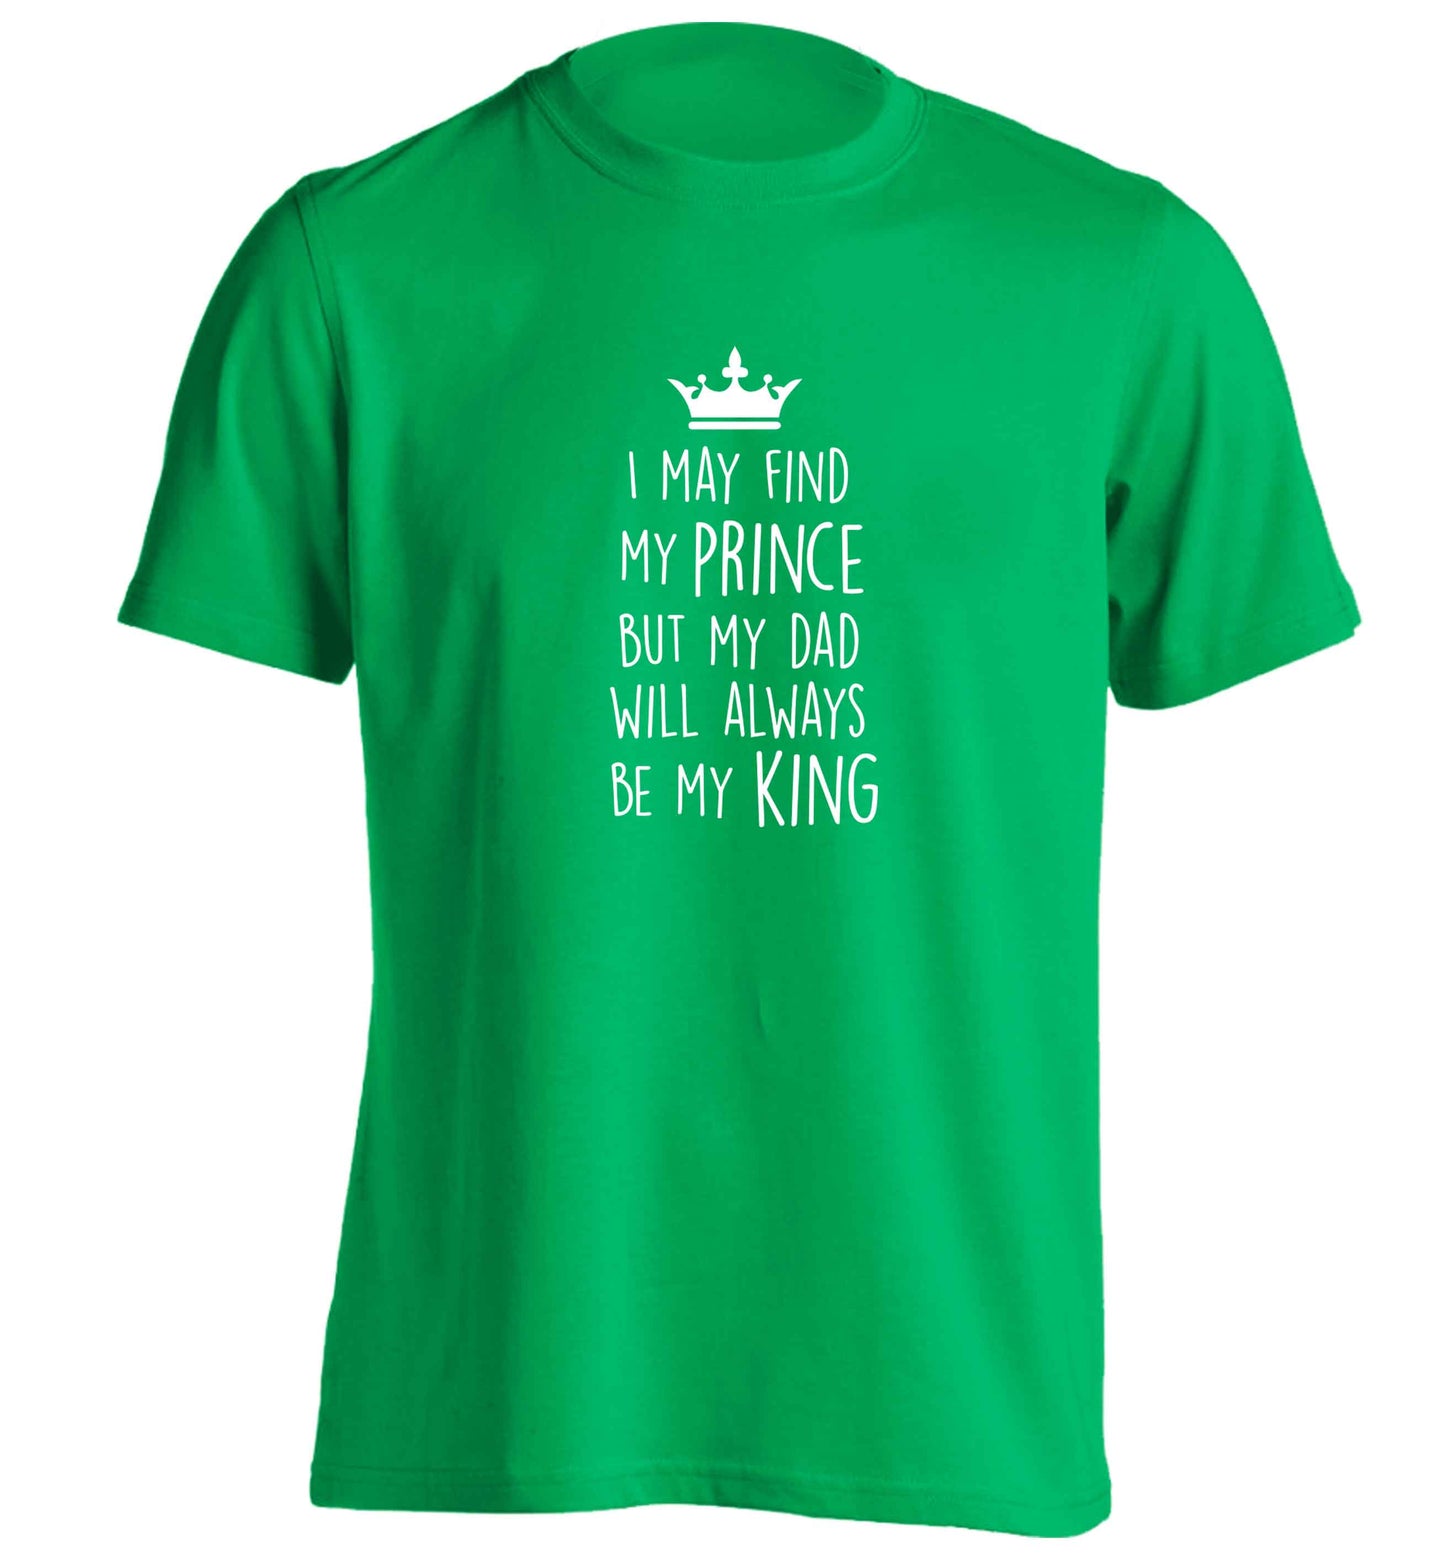 I may find my prince but my dad will always be my king adults unisex green Tshirt 2XL